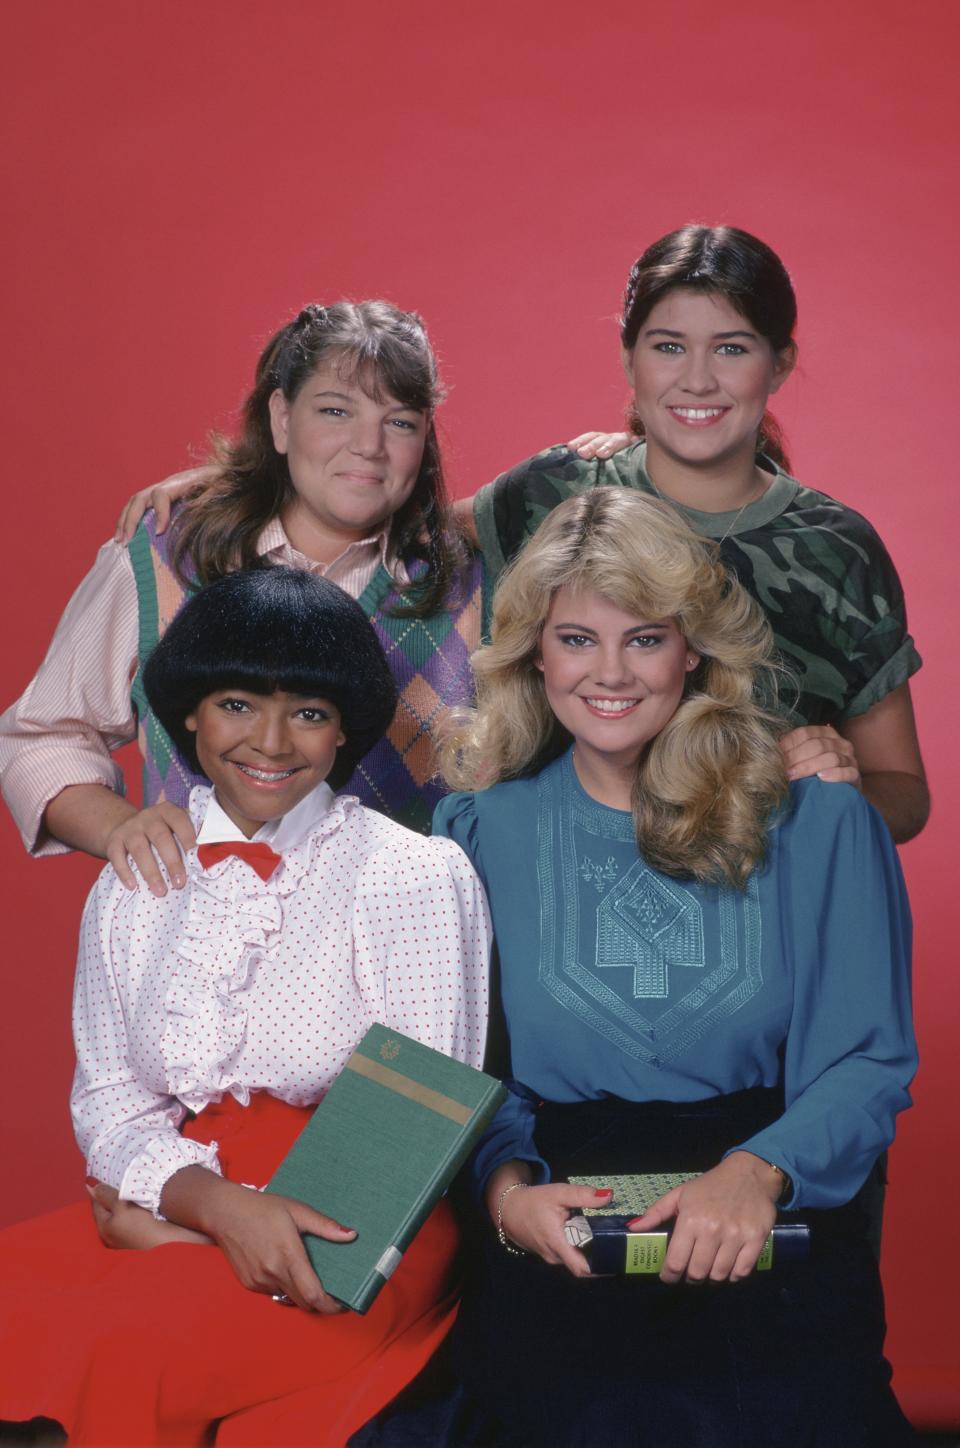 THE FACTS OF LIFE -- Season 3 -- Pictured: (l-r) Kim Fields as Dorothy 'Tootie' Ramsey, Mindy Cohn as Natalie Letisha Sage Green, Nancy McKeon as Joanna 'Jo' Marie Polniaczek Bonner and Lisa Whelchel as Blair Warner  (Photo by NBCU Photo Bank/NBCUniversal via Getty Images via Getty Images)